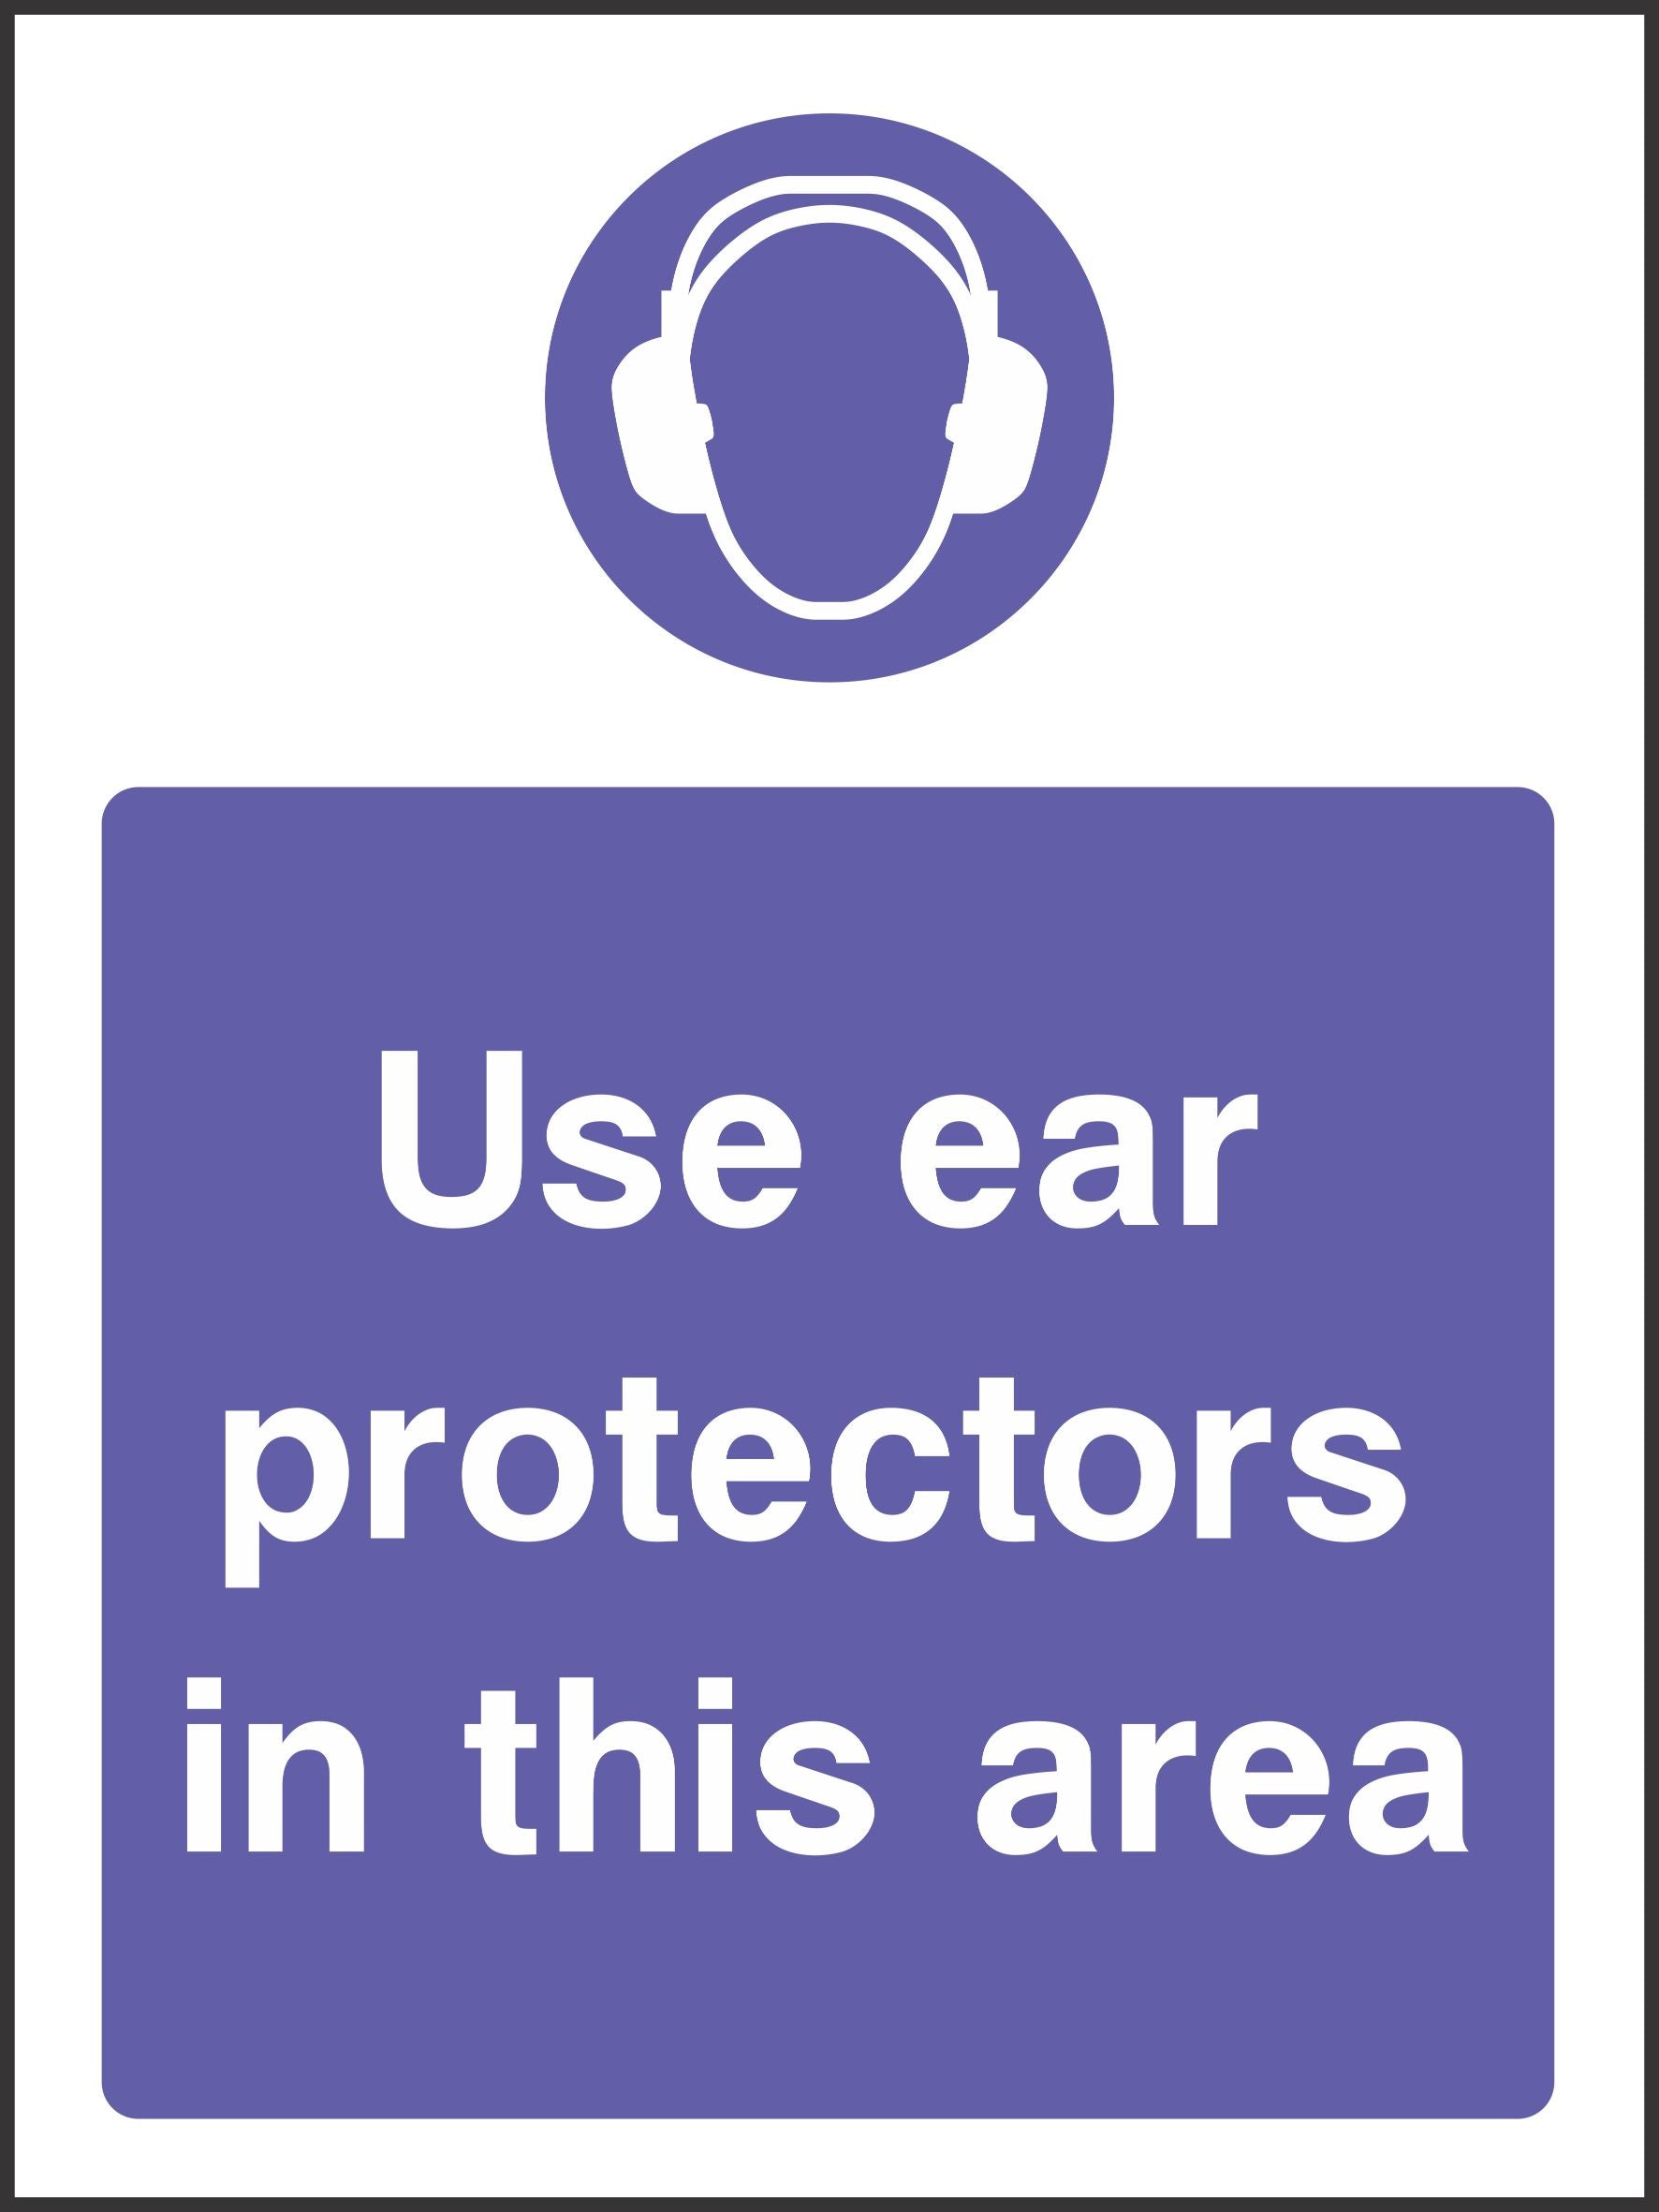 Use ear protection in this area sign